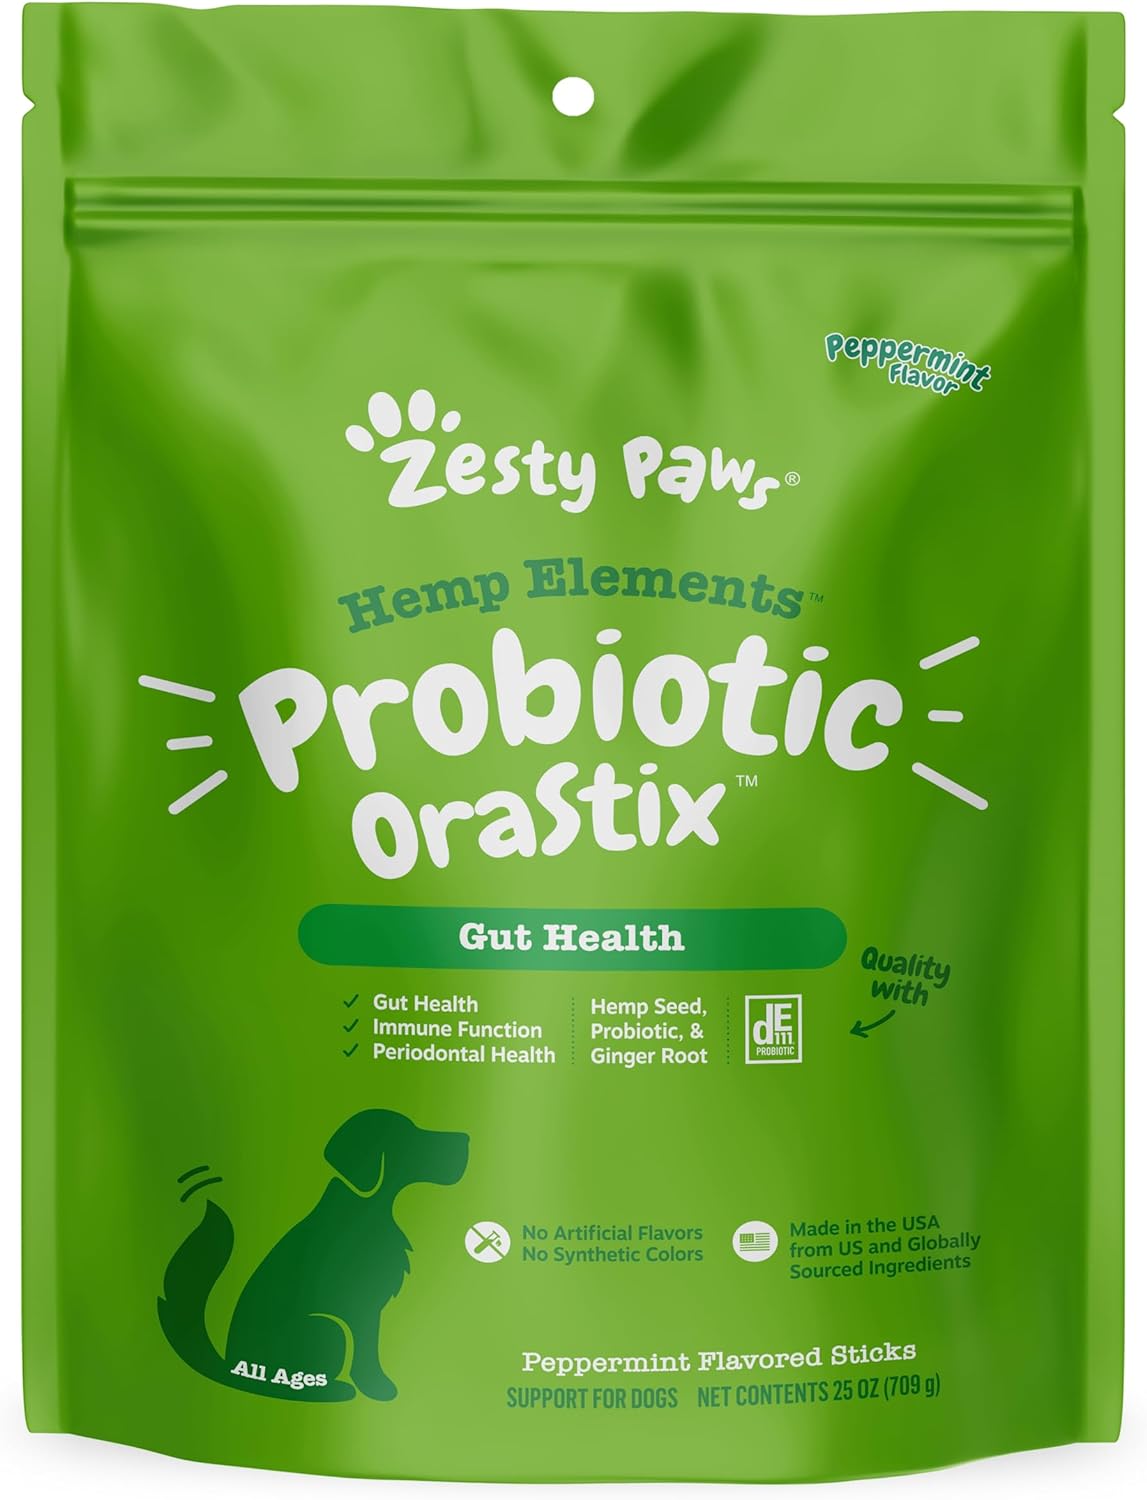 Zesty Paws OraStix for Dogs - Probiotic Sticks with Hemp Seed Curcumin Ginger Root Taurine - Supports Gut Function Flora Immune System Proprietary Healthy Teeth Gum Blend - 25oz